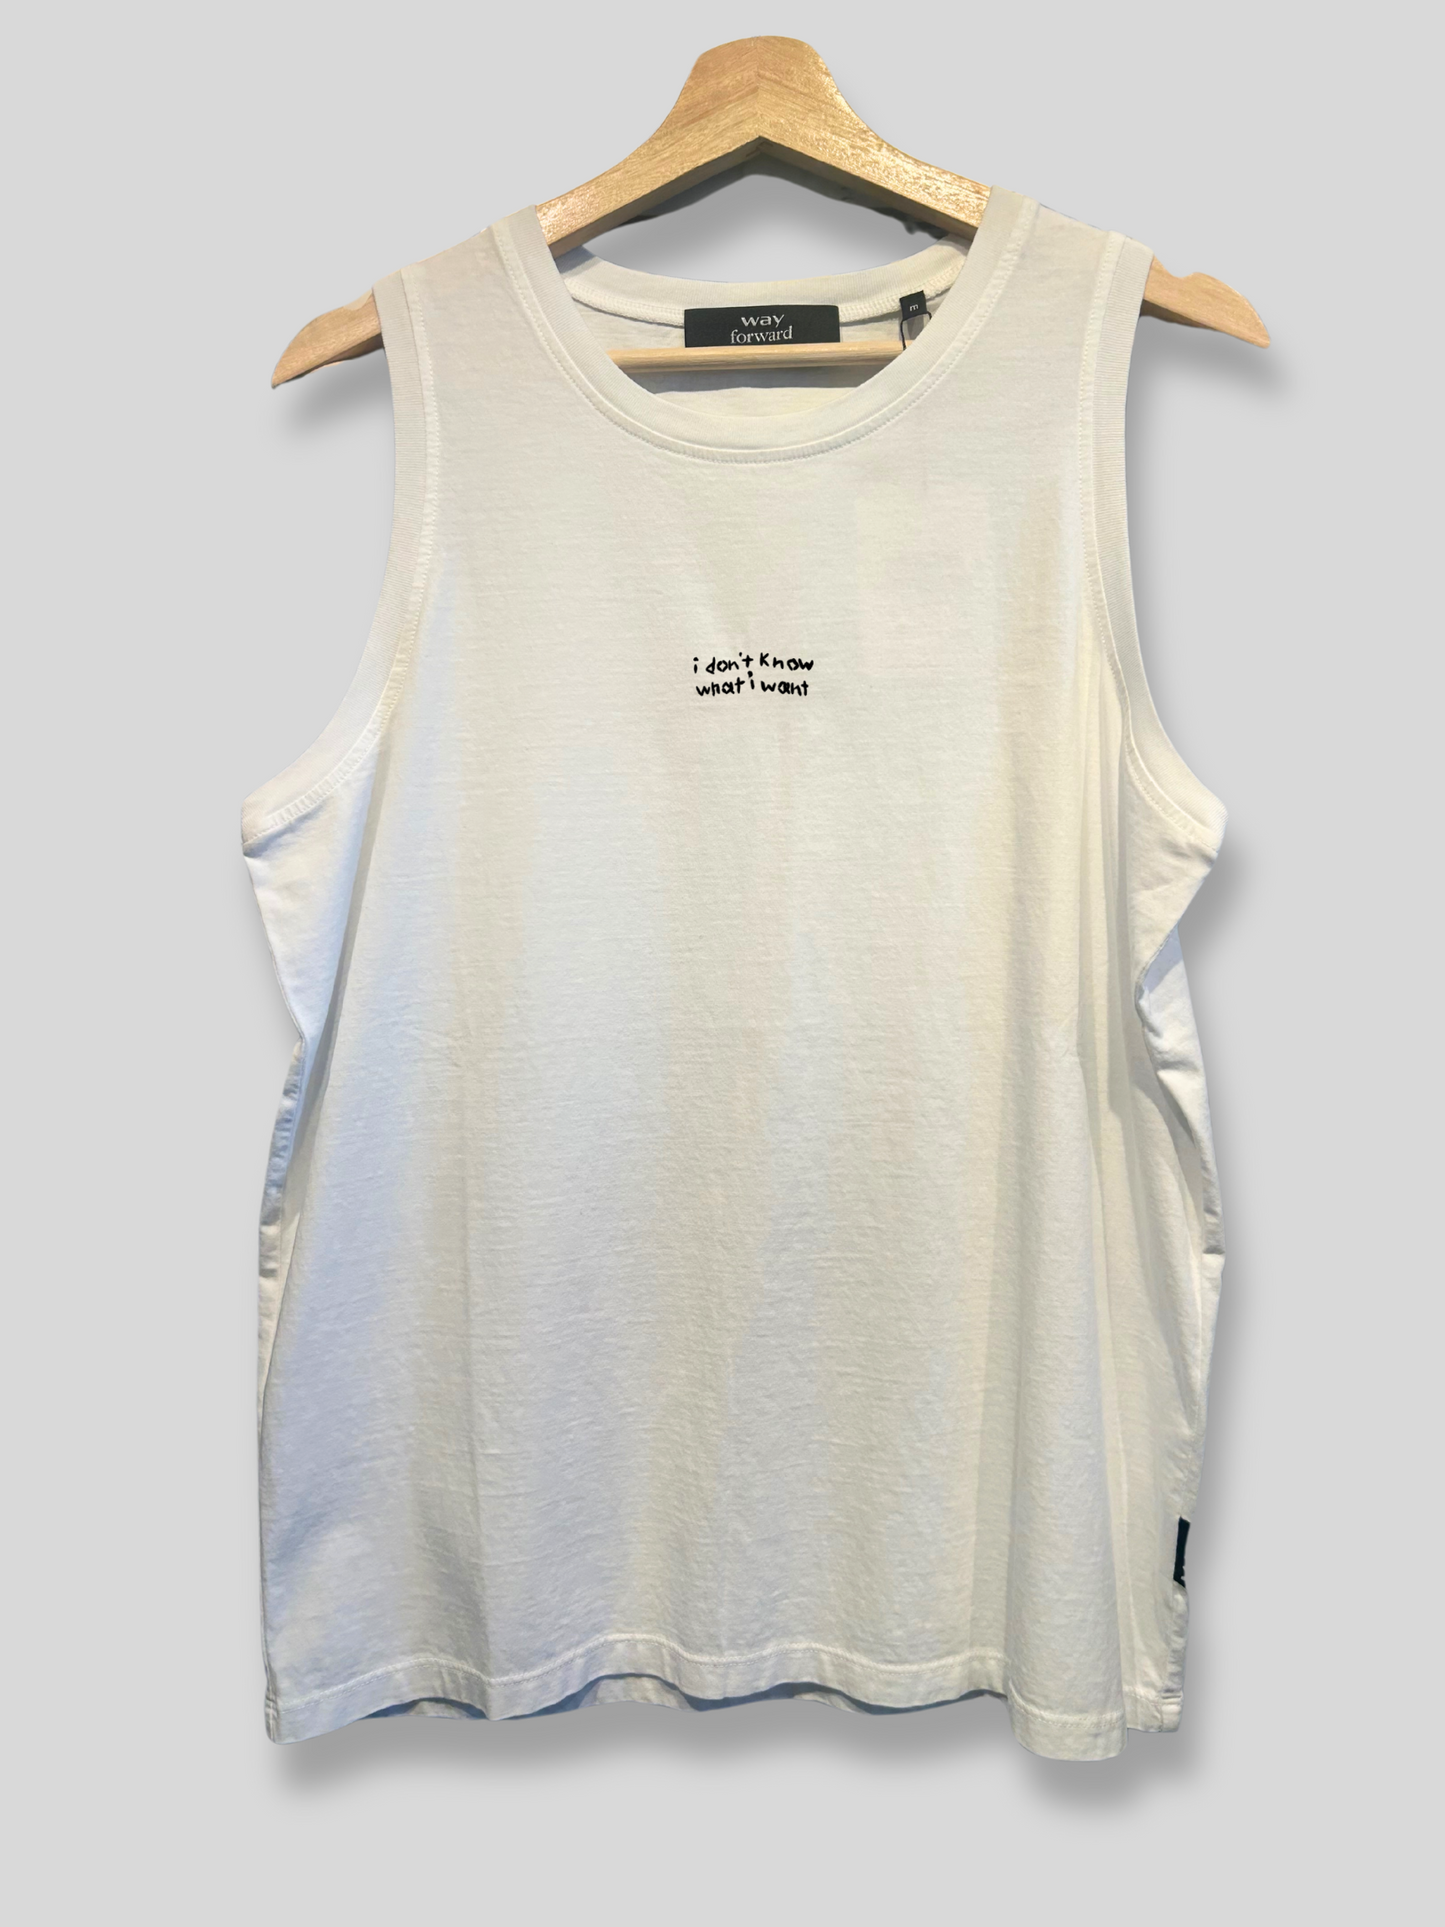 I don’t Know What I Want- Tank Top